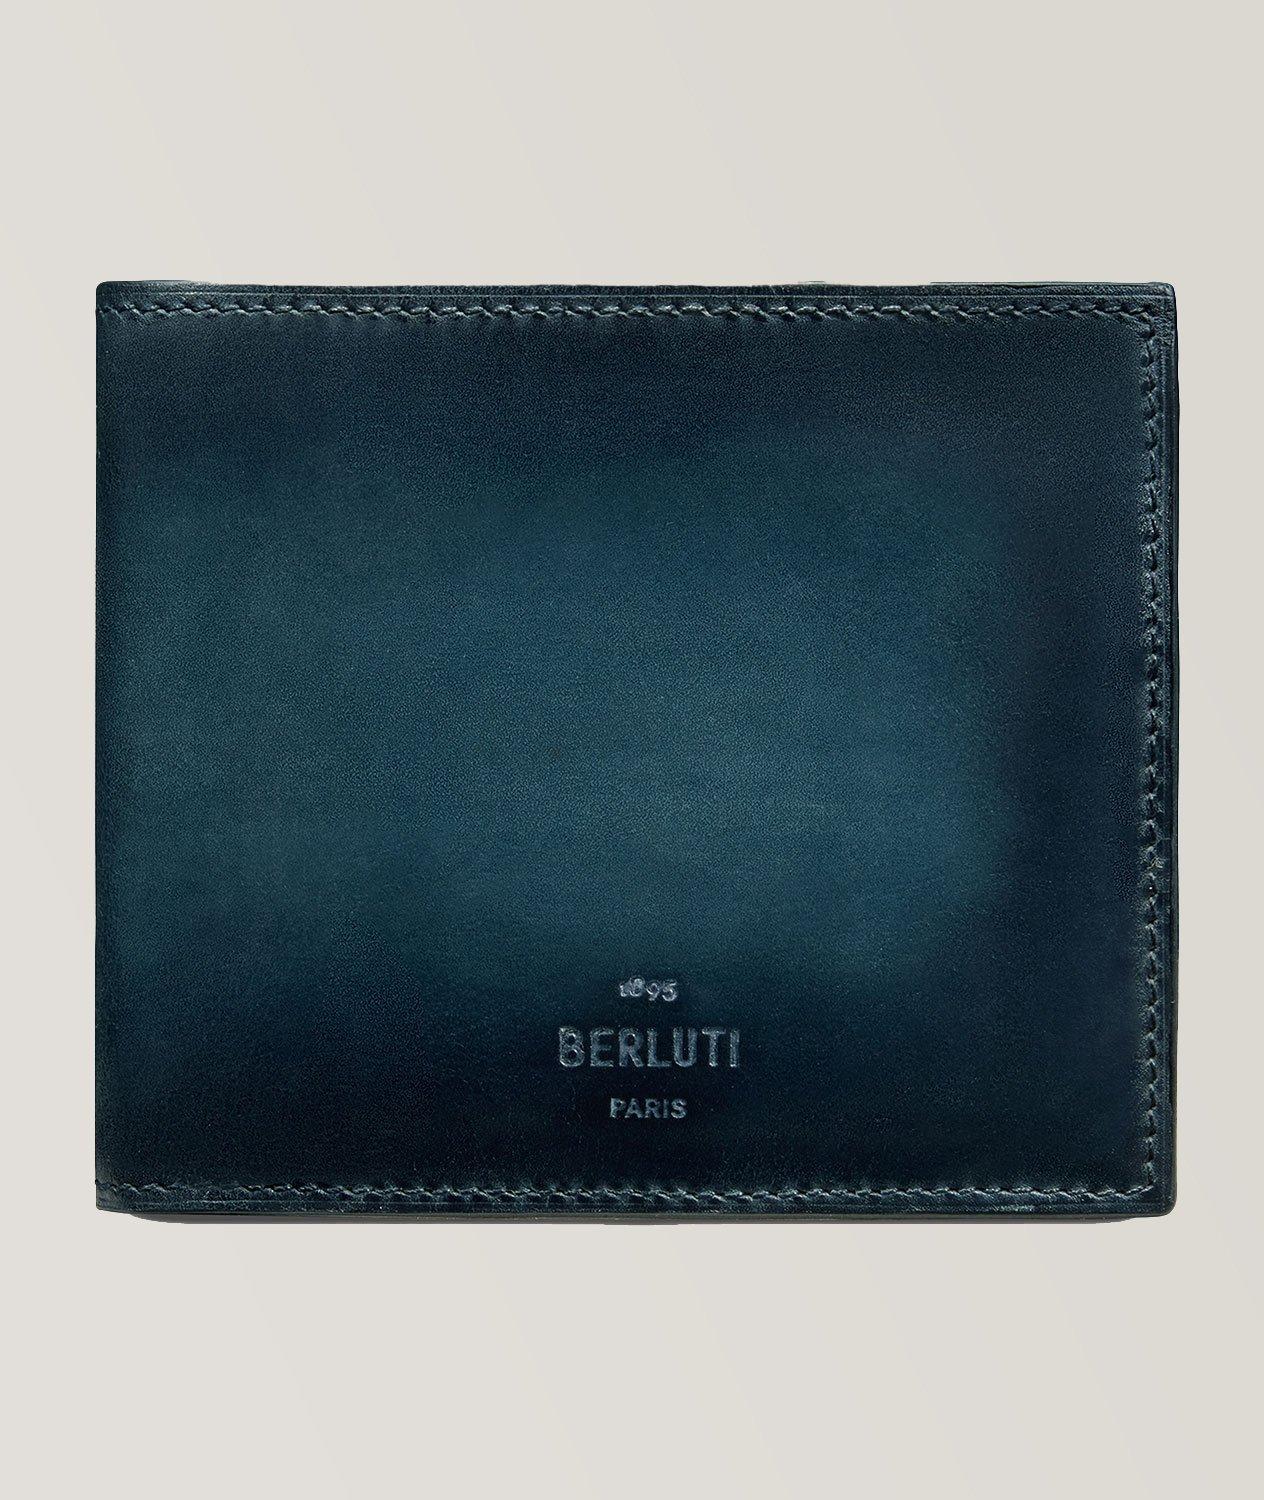 Makore Leather Wallet image 0